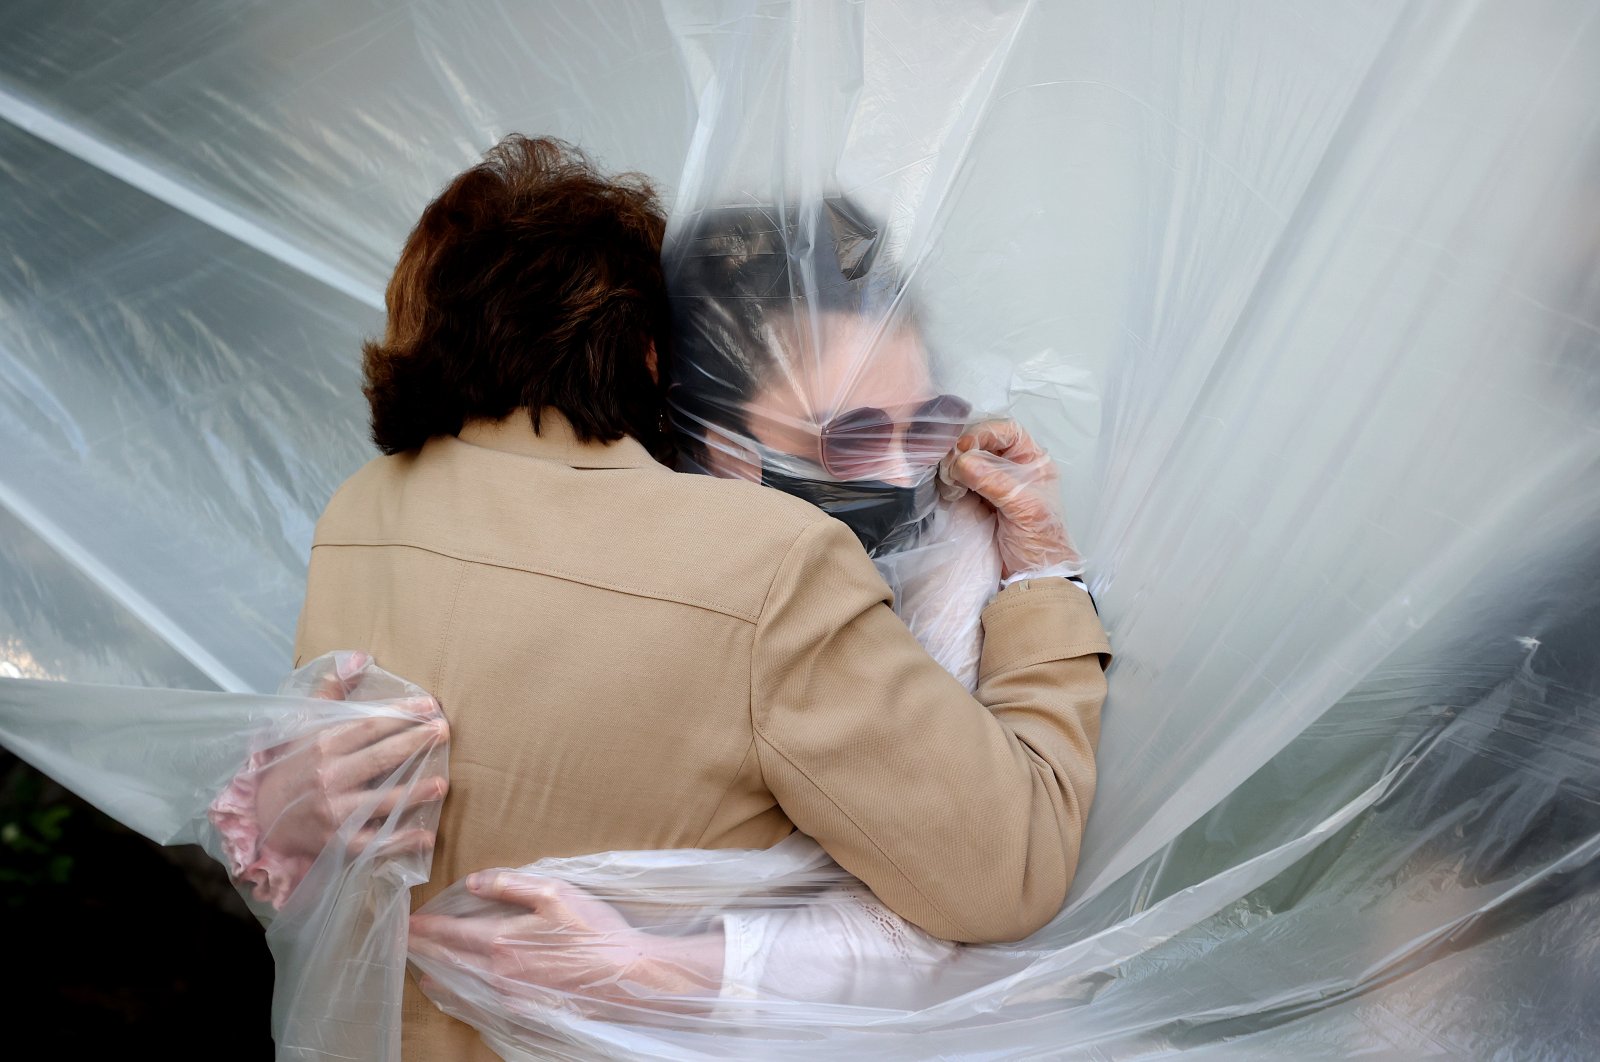 Olivia Grant (R) hugs her grandmother, Mary Grace Sileo through a plastic drop cloth in Wantagh, New York, U.S., May 24, 2020. (Getty Images)